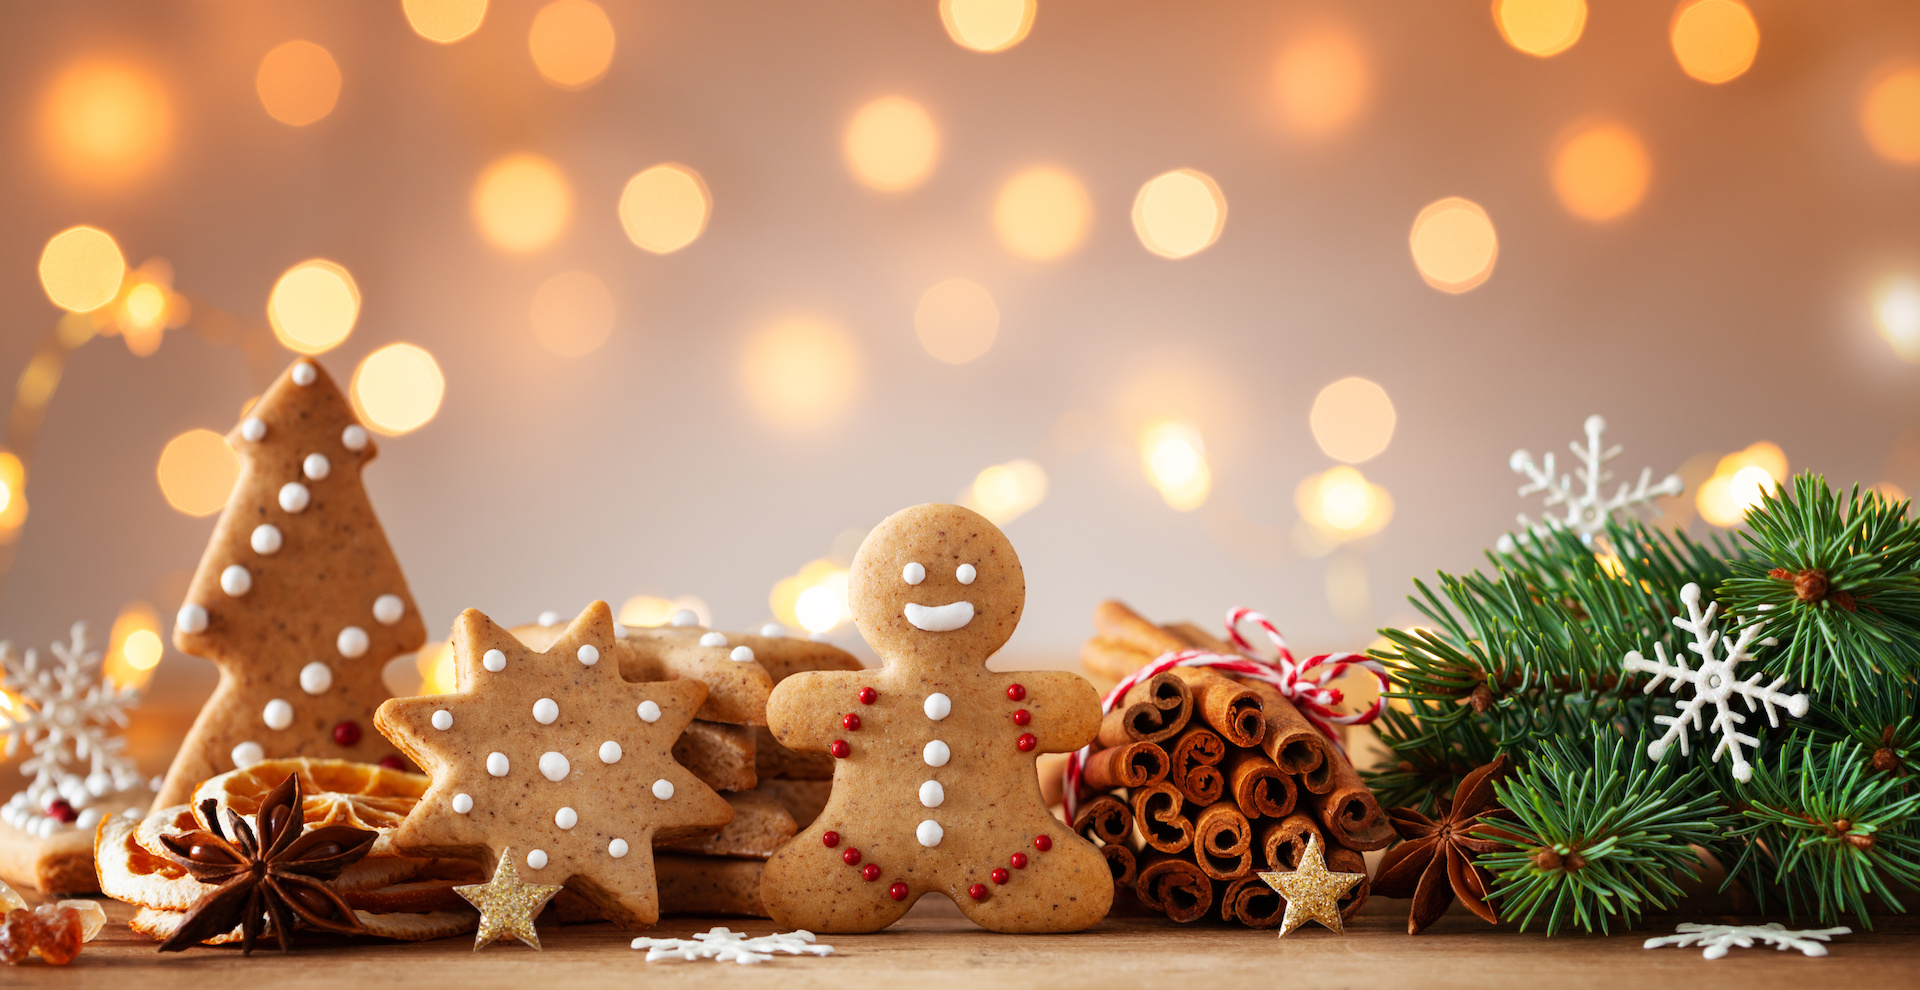 Food & Beverage Holiday Activities For The Whole Family